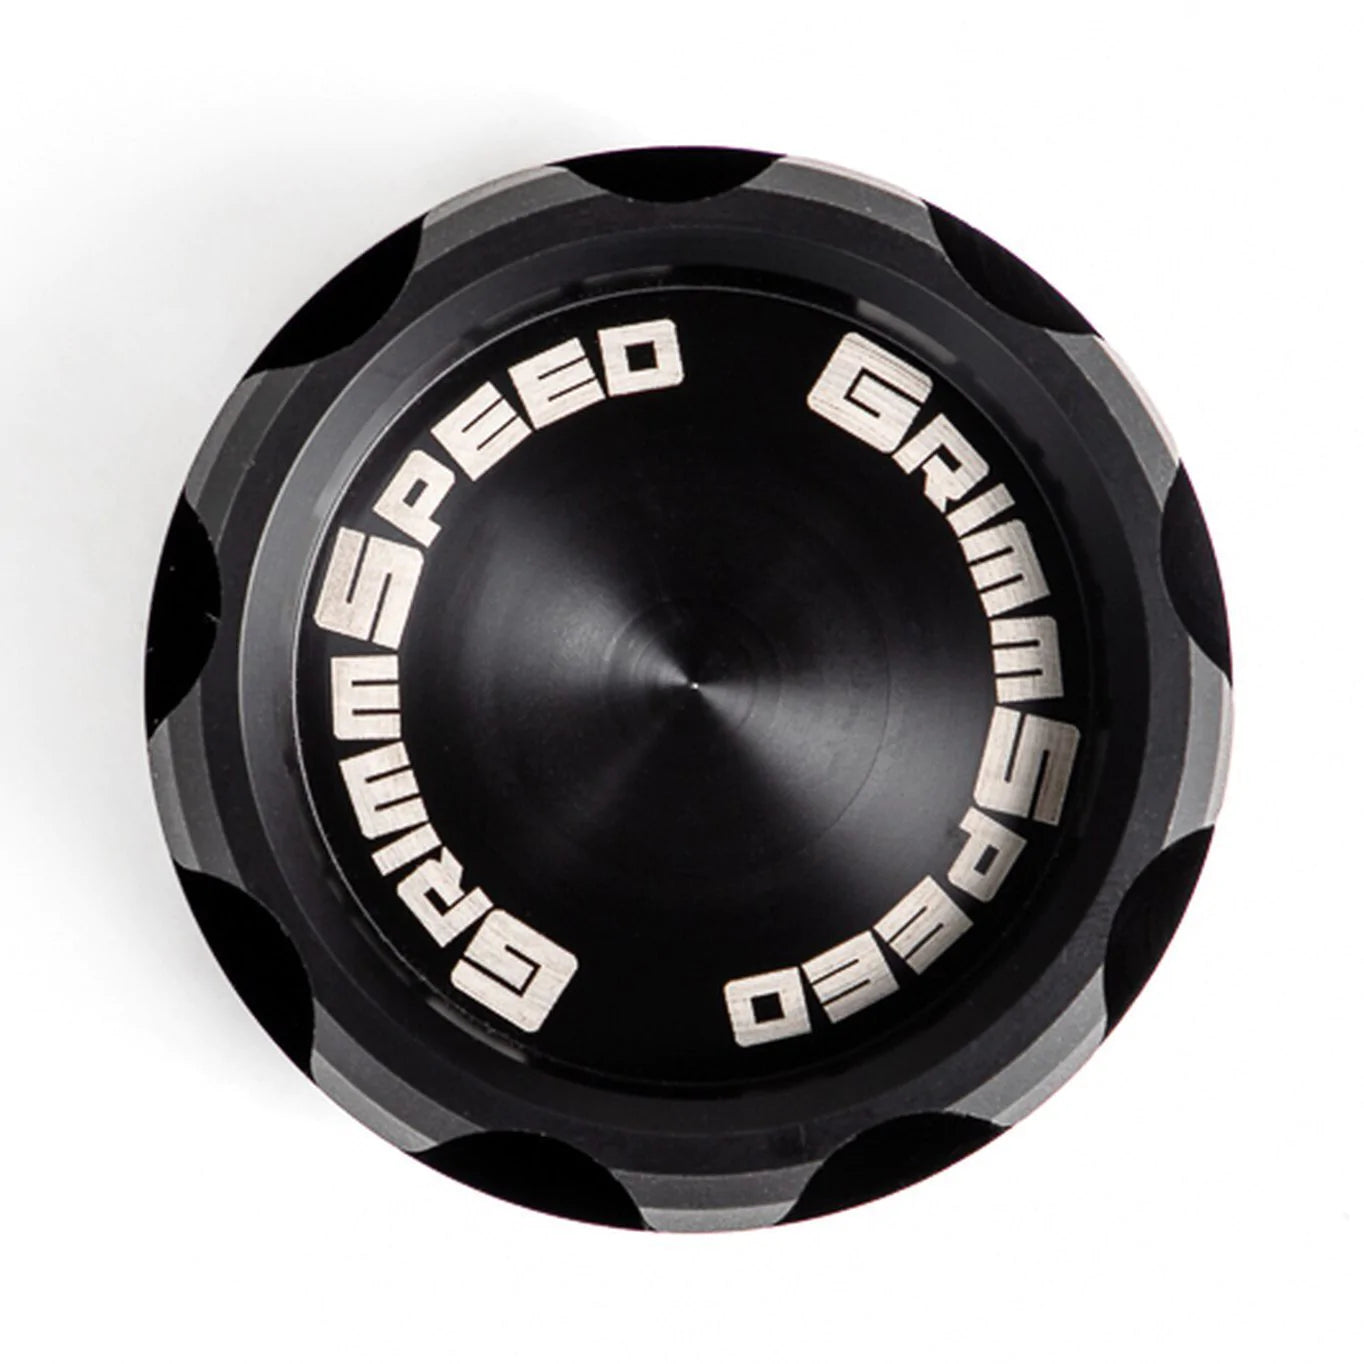 GrimmSpeed Delrin "Cool Touch" Oil Cap Version 2 | 1989-2019 Subaru EJ/FA Engines